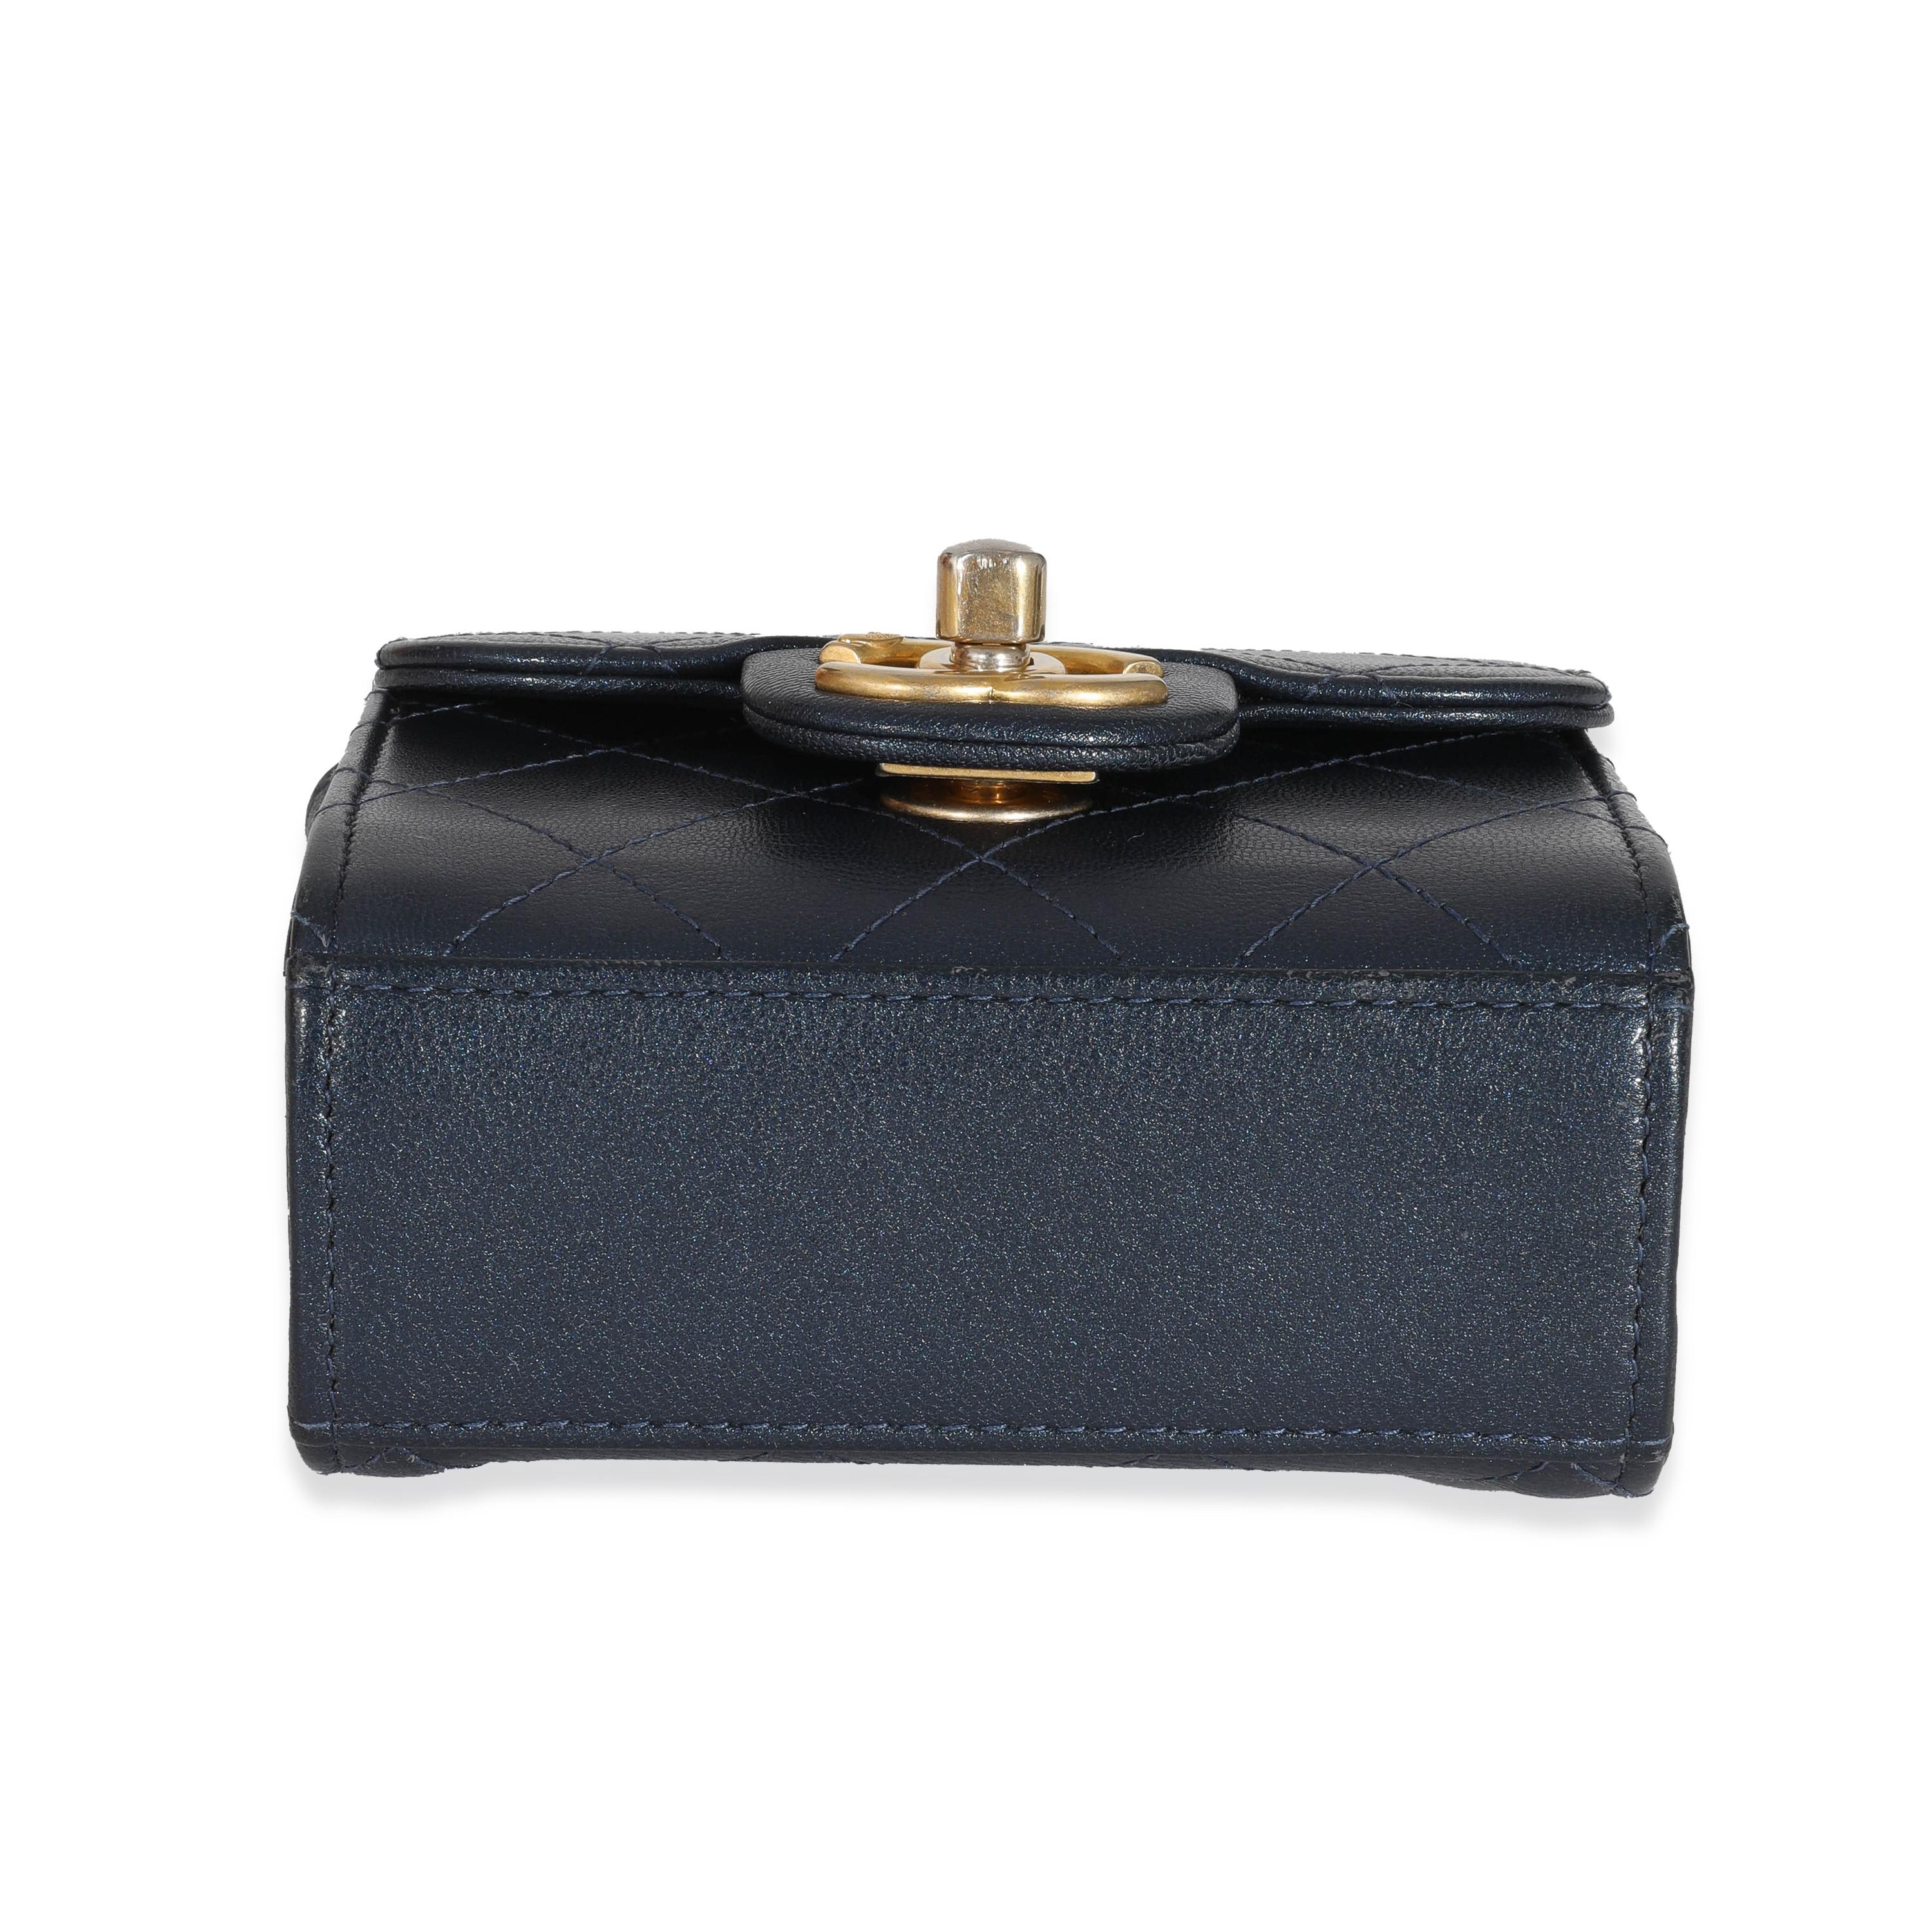 Chanel Navy Goatskin Chic Pearls Mini Flap Bag For Sale 2